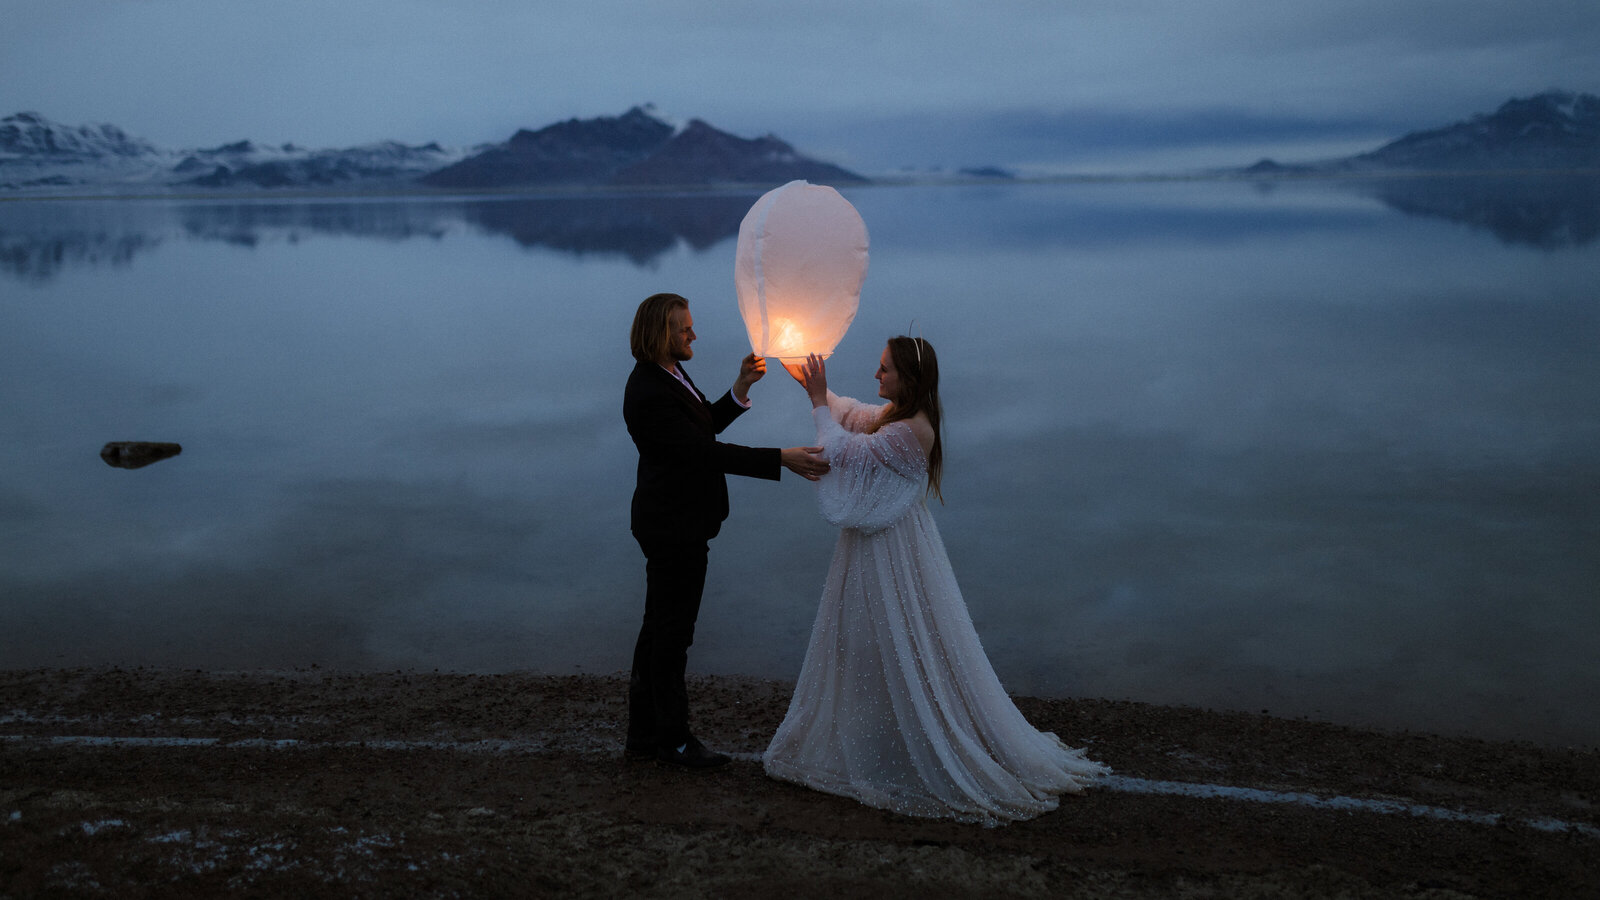 Bride and groom holding a lantern